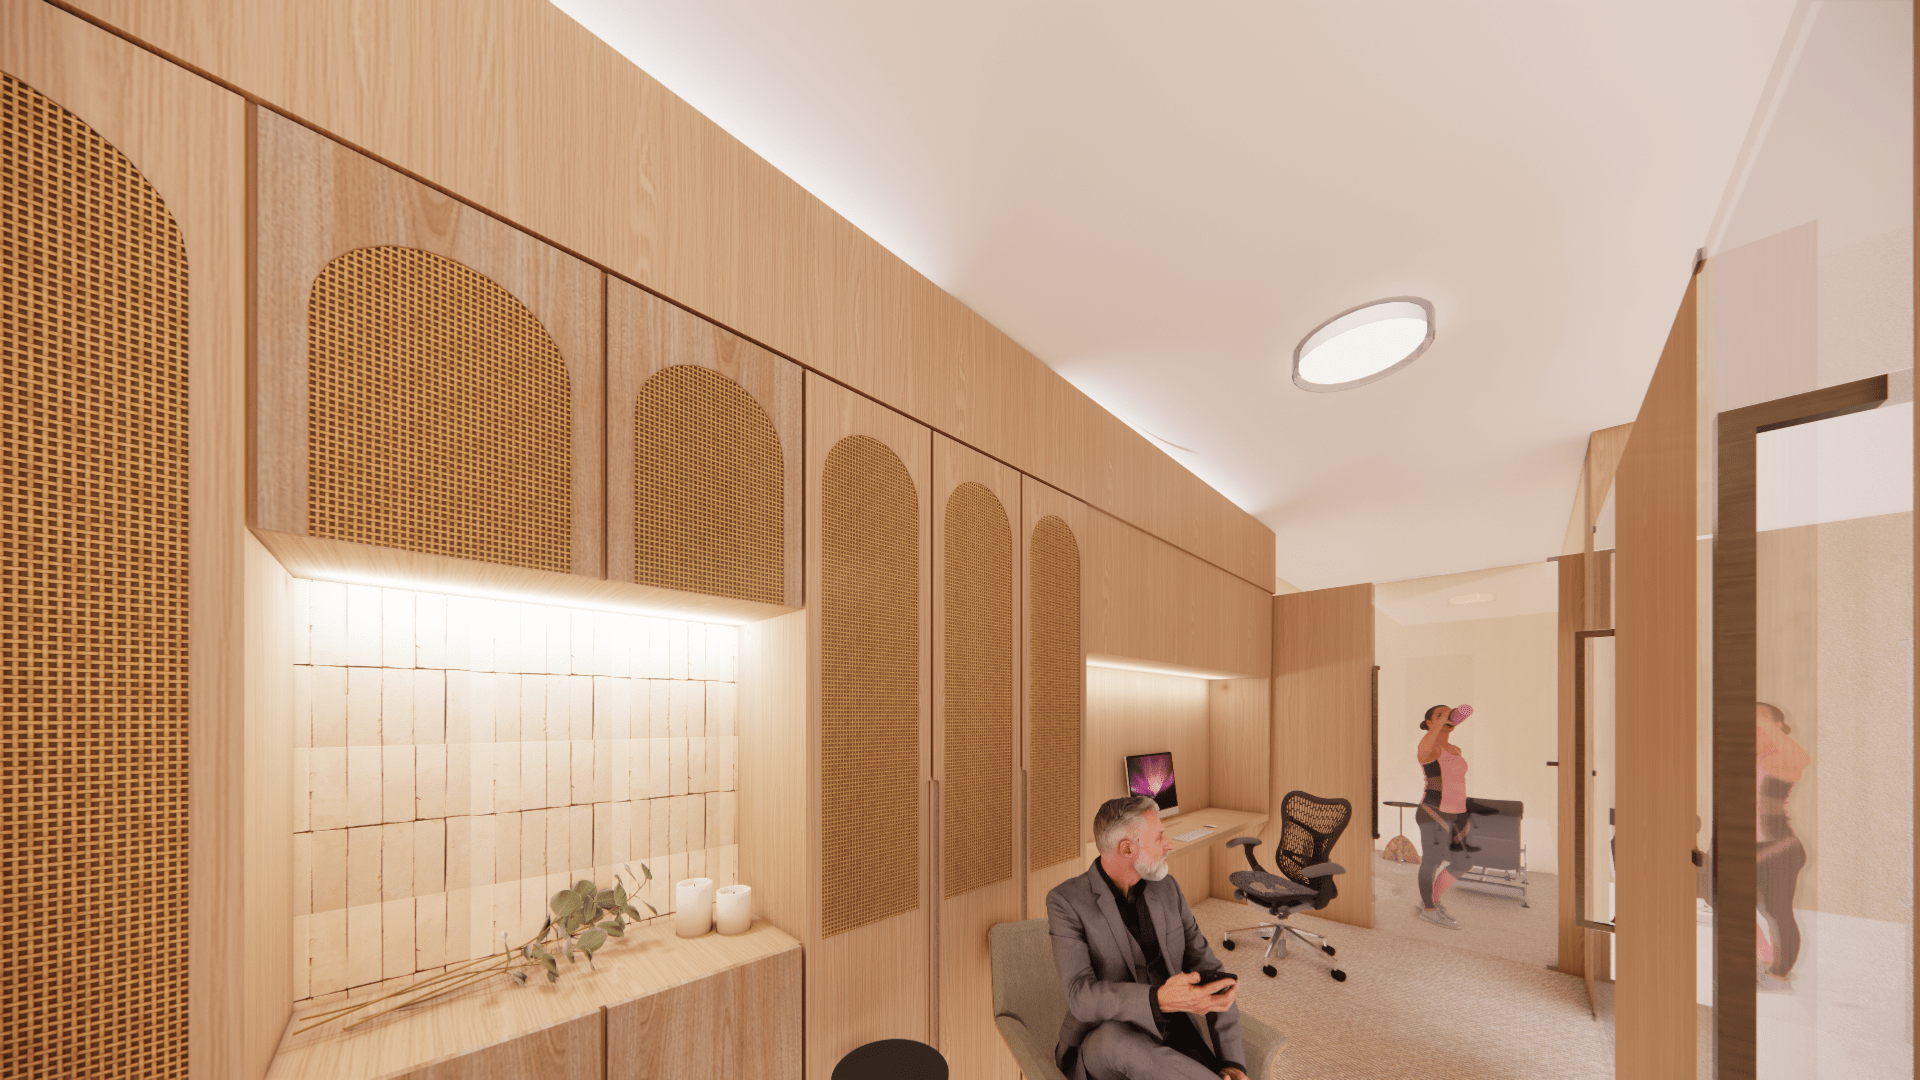 Client waiting area, Interior Design, Mental Health & Wellness Centre in Vancouver British Columbia, by Cutler